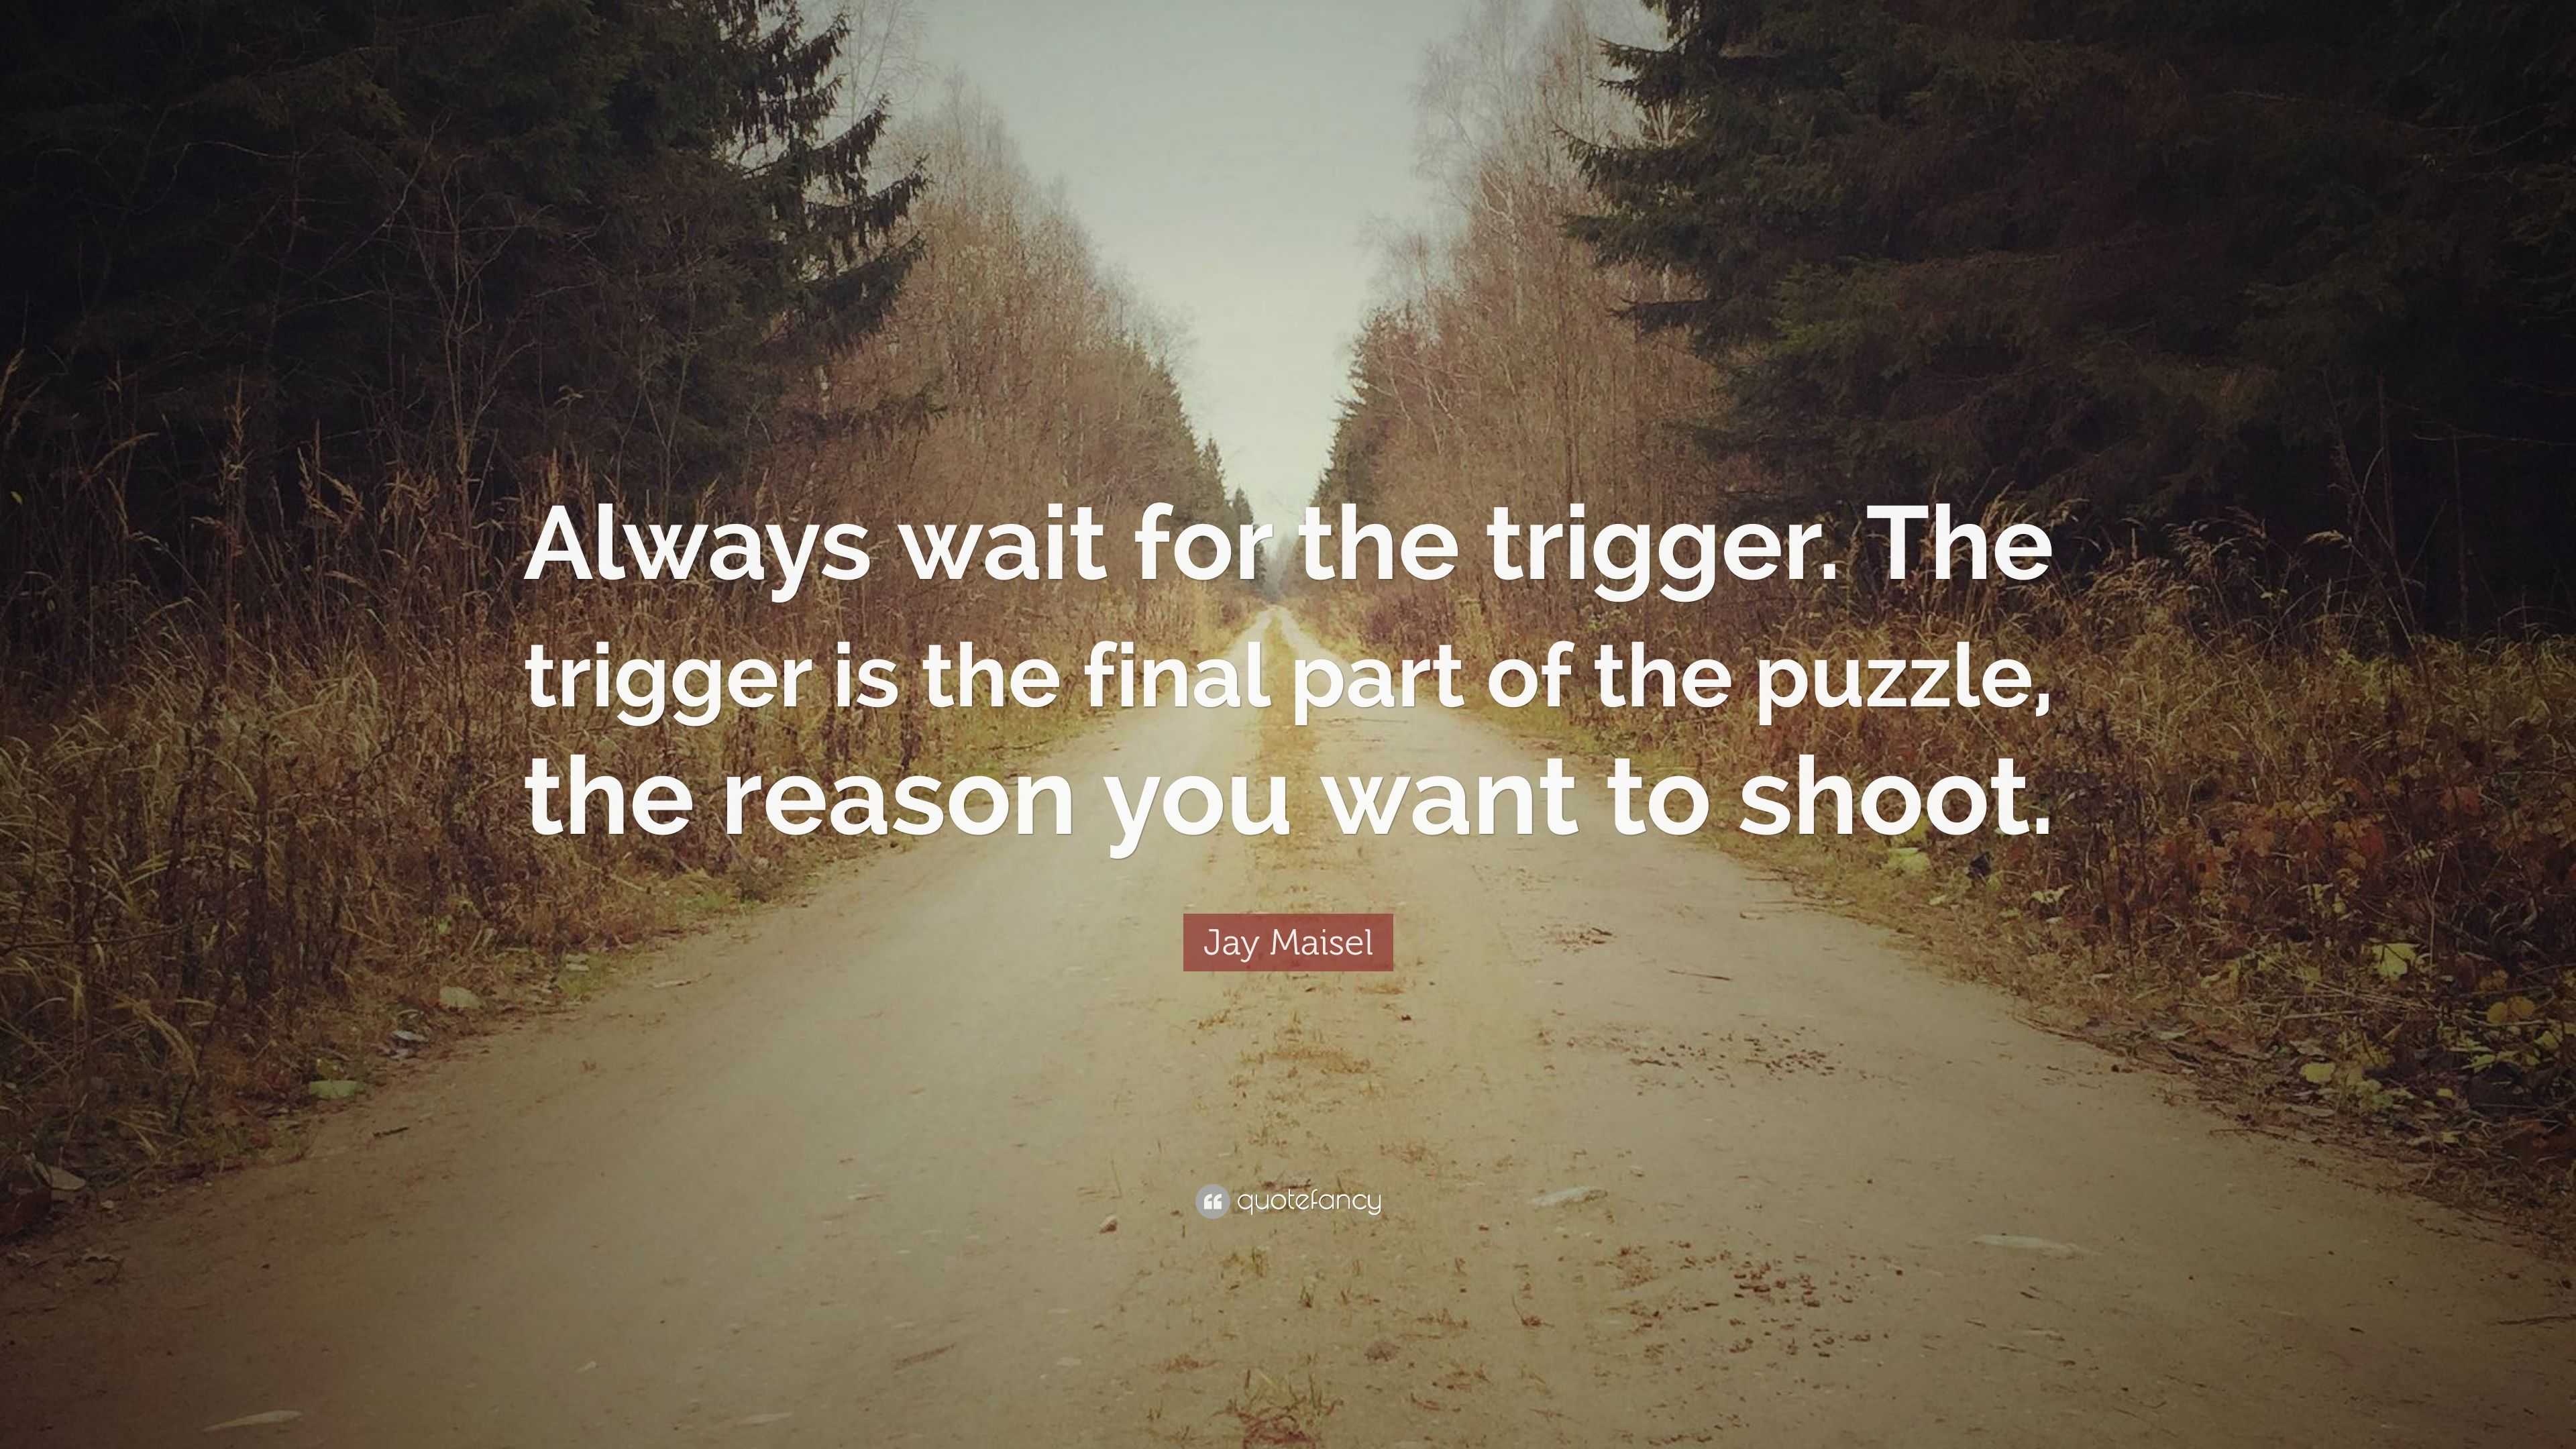 Jay Maisel Quote: “Always wait for the trigger. The trigger is the ...